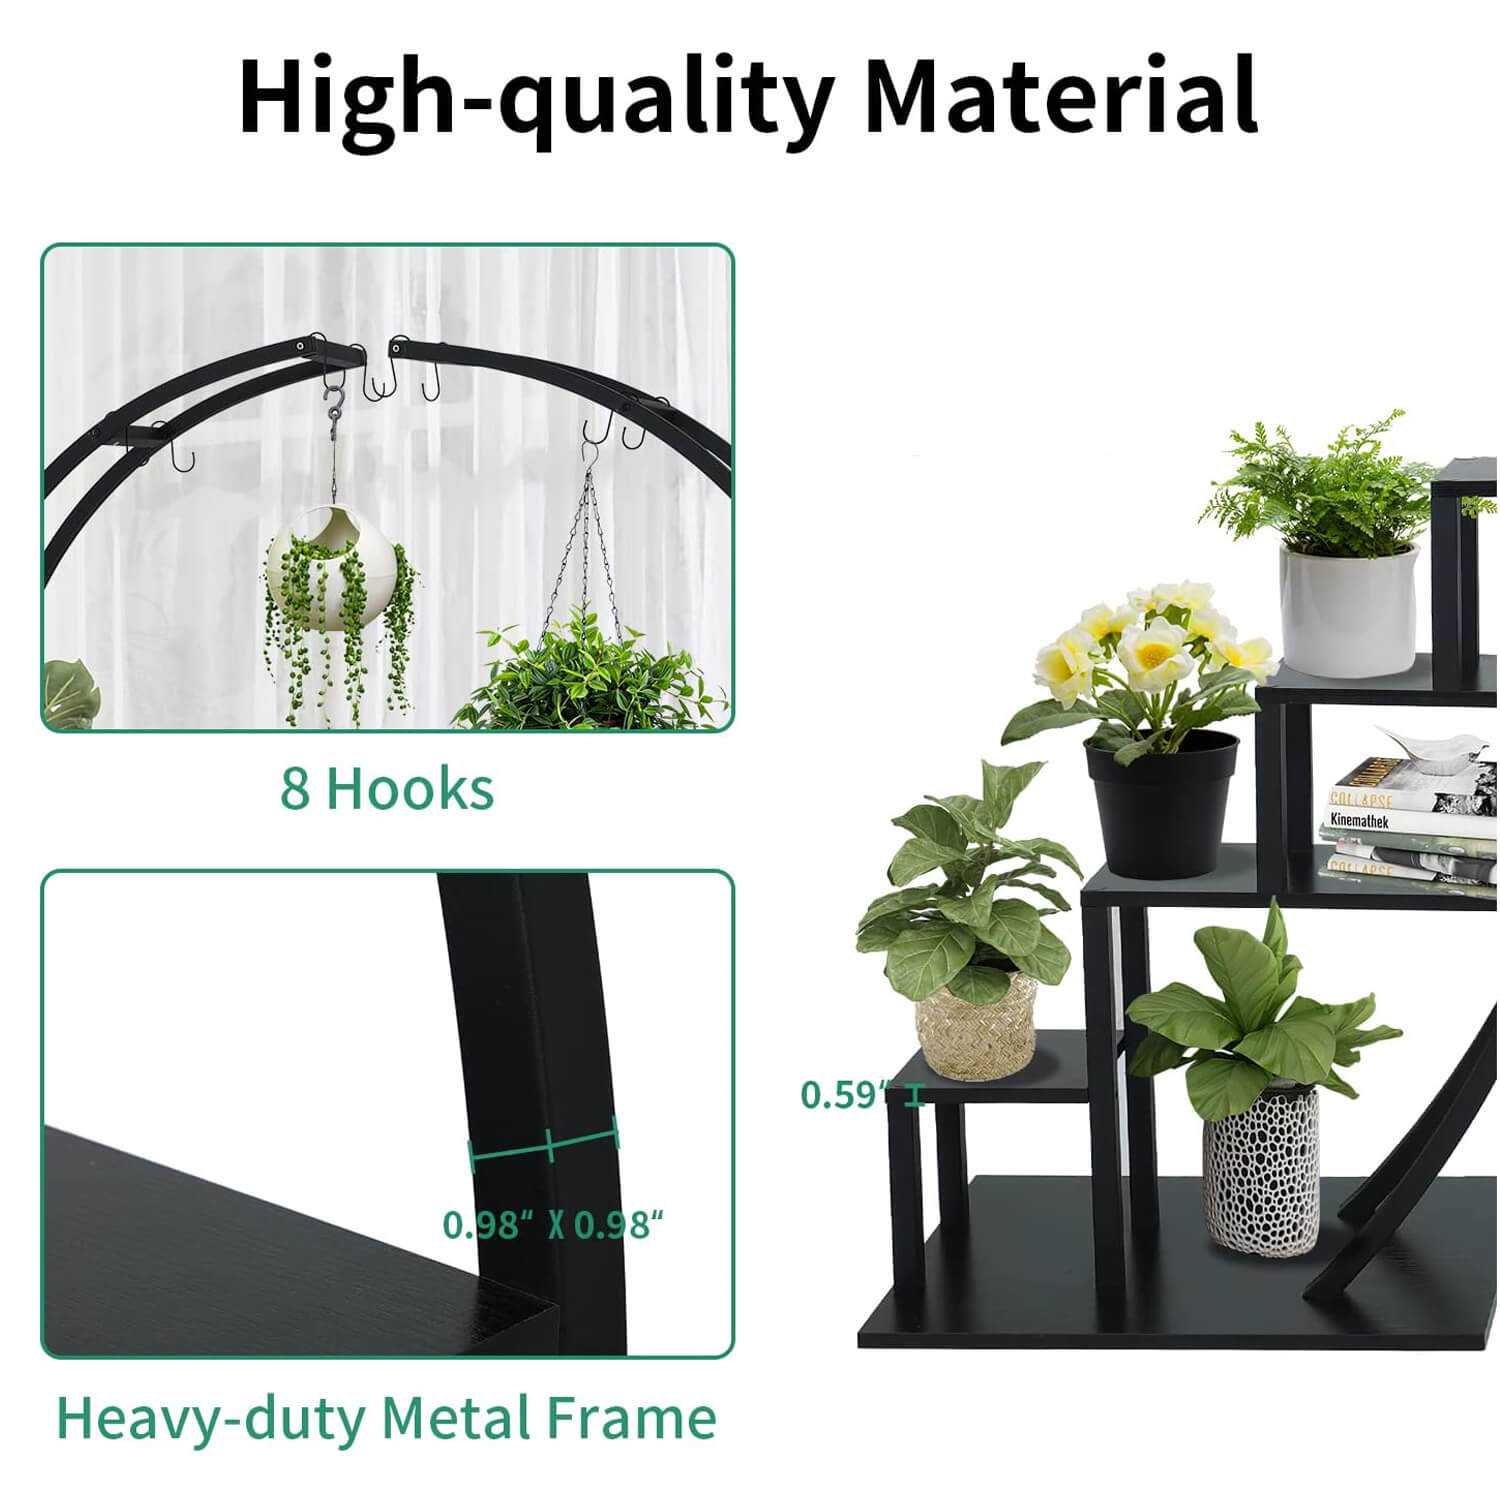 Elecwish Black Plant Stand Indoor, 5 Tier Half Circle Ladder Flower Pot Stand GD003 has high quality material